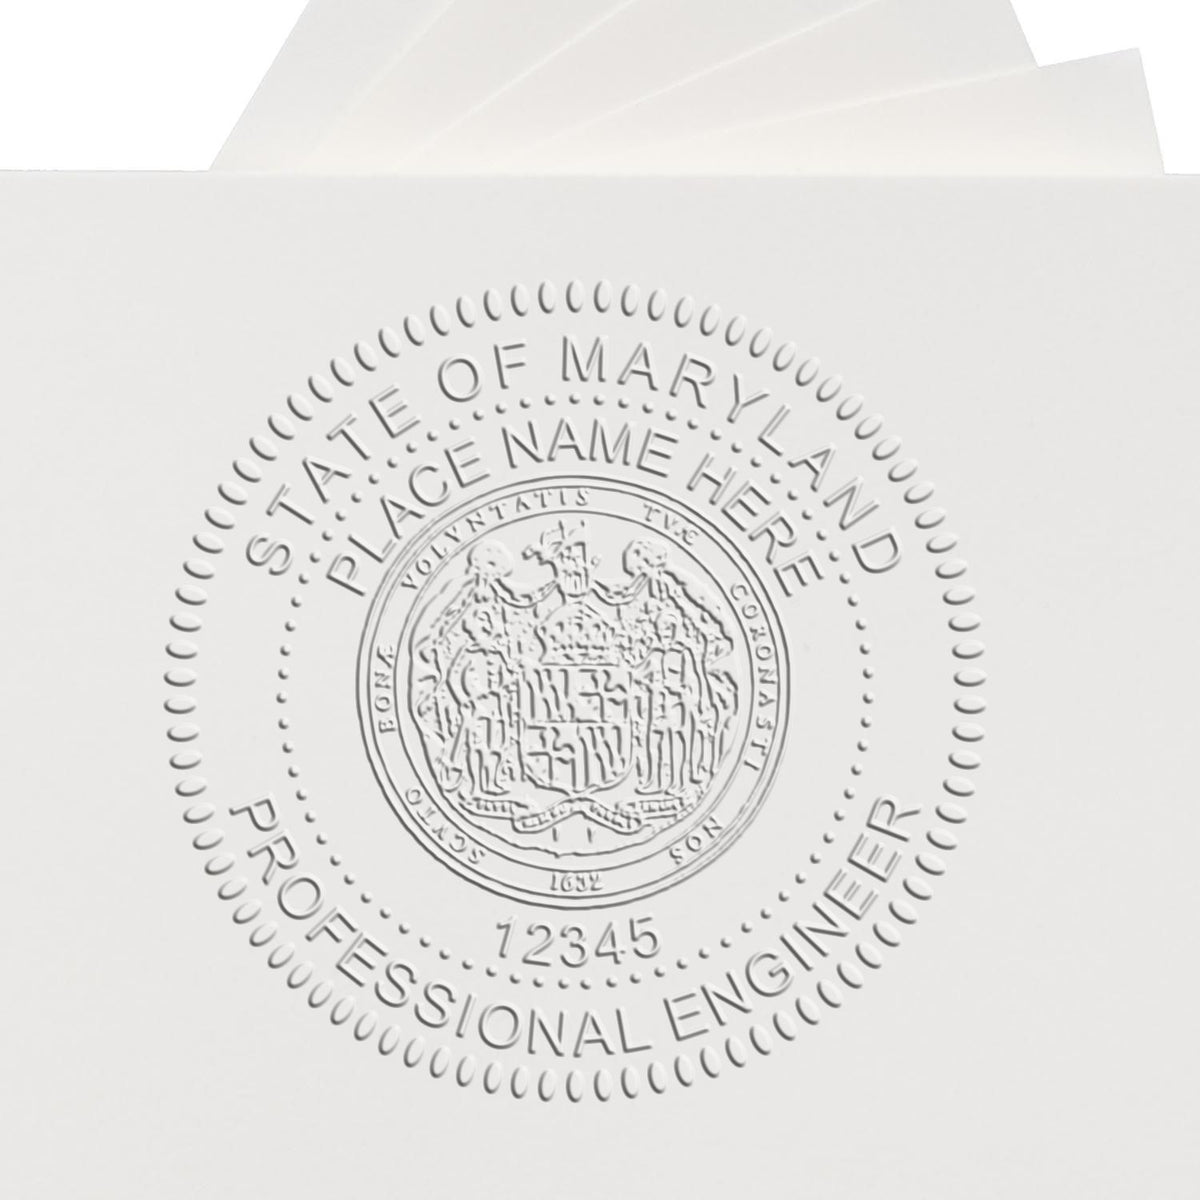 The Gift Maryland Engineer Seal stamp impression comes to life with a crisp, detailed image stamped on paper - showcasing true professional quality.